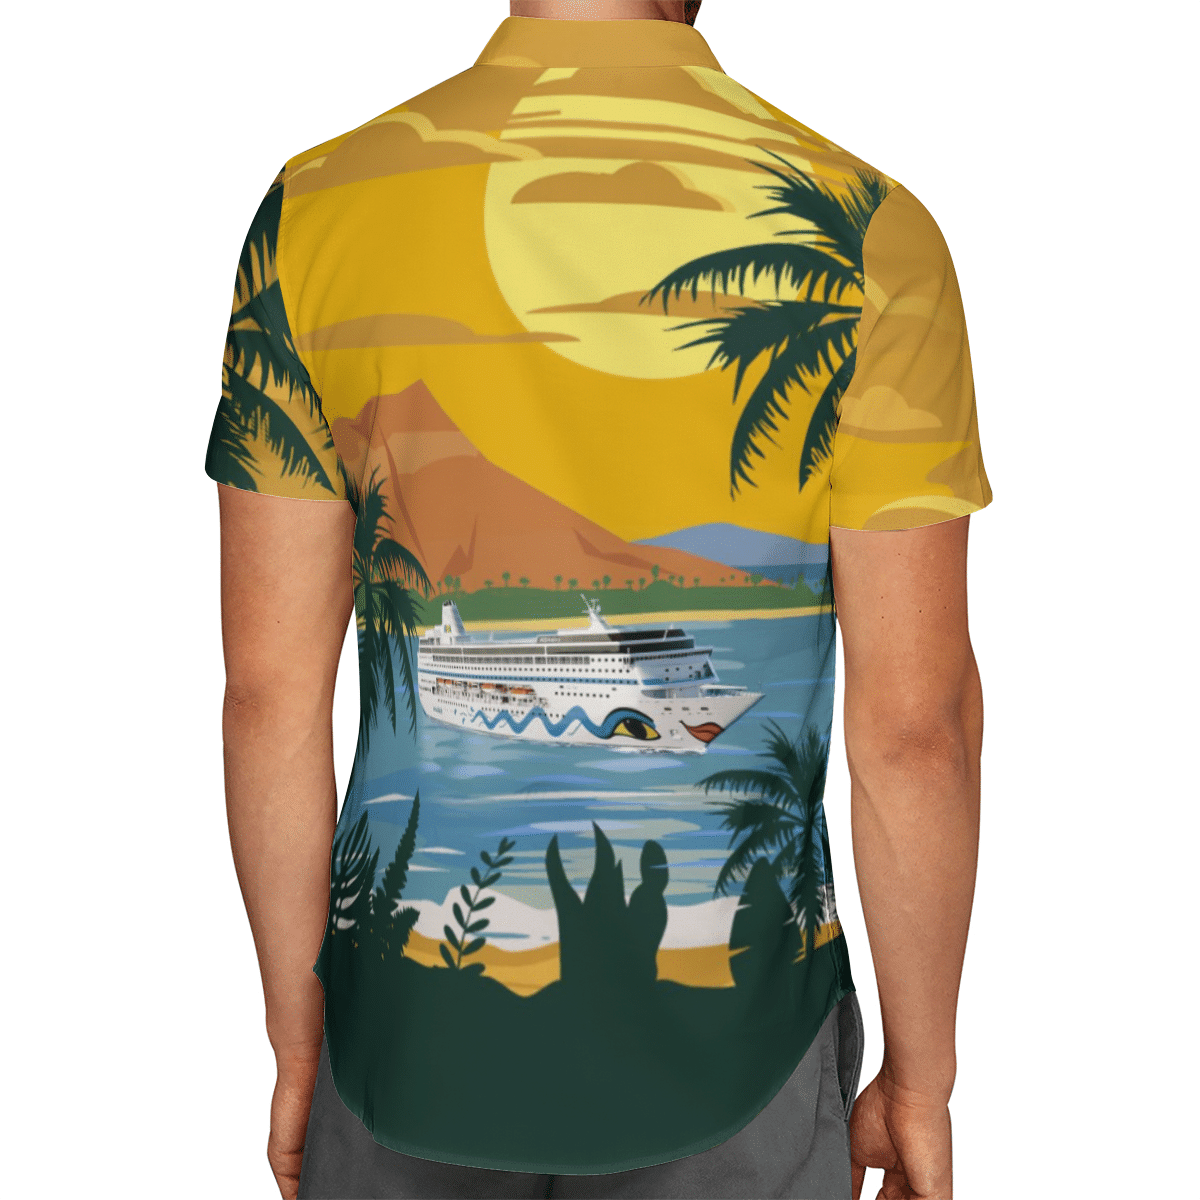 Going to the beach with a quality shirt 121